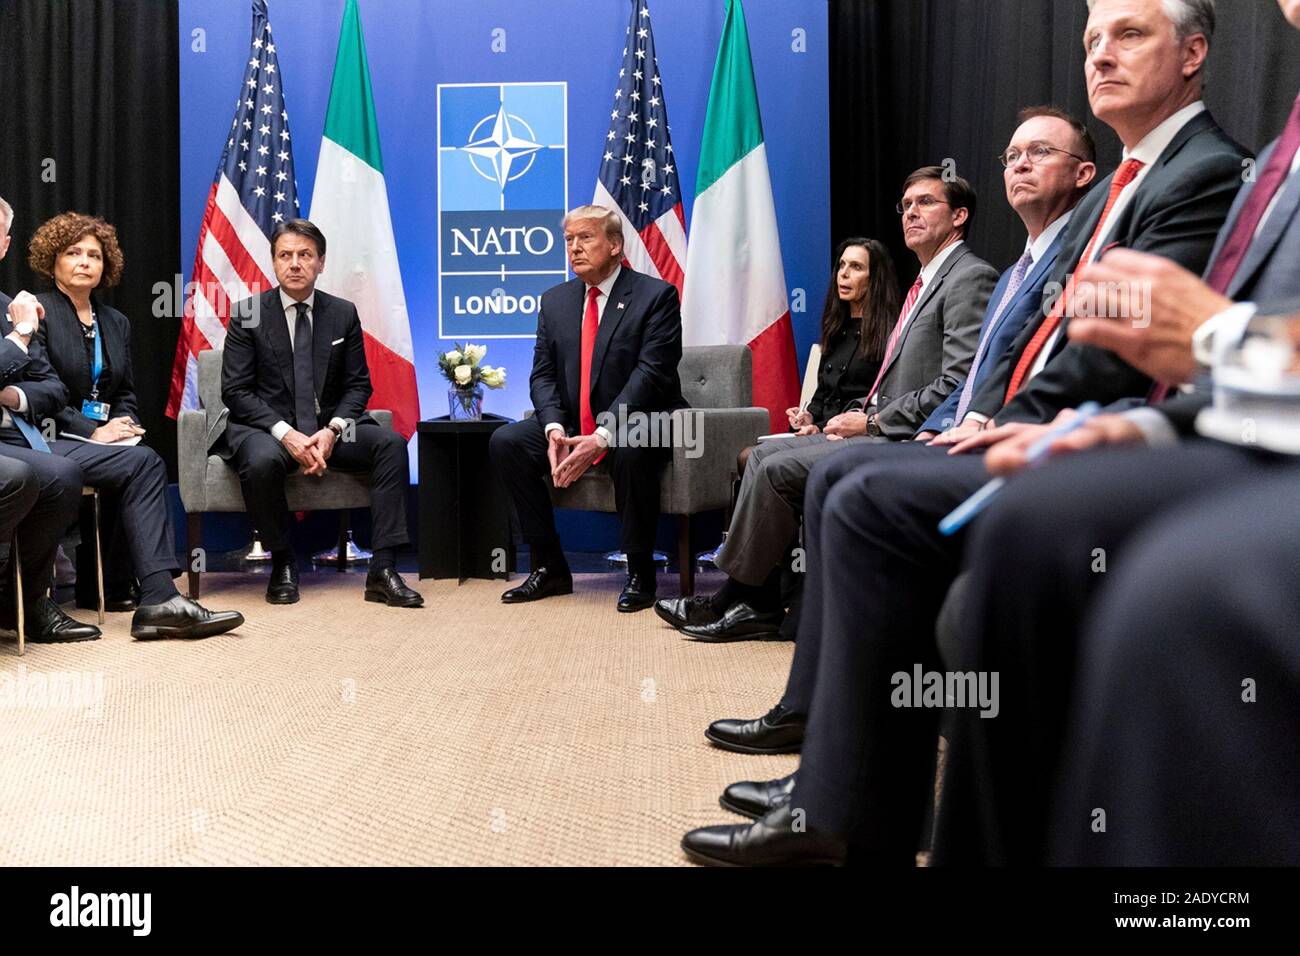 U.S. President Donald Trump holds a bilateral meeting with Italian Prime Minister Giuseppe Conti on the sidelines of the NATO Summit December 4, 2019 in Watford, Hertfordshire, United Kingdom. Stock Photo